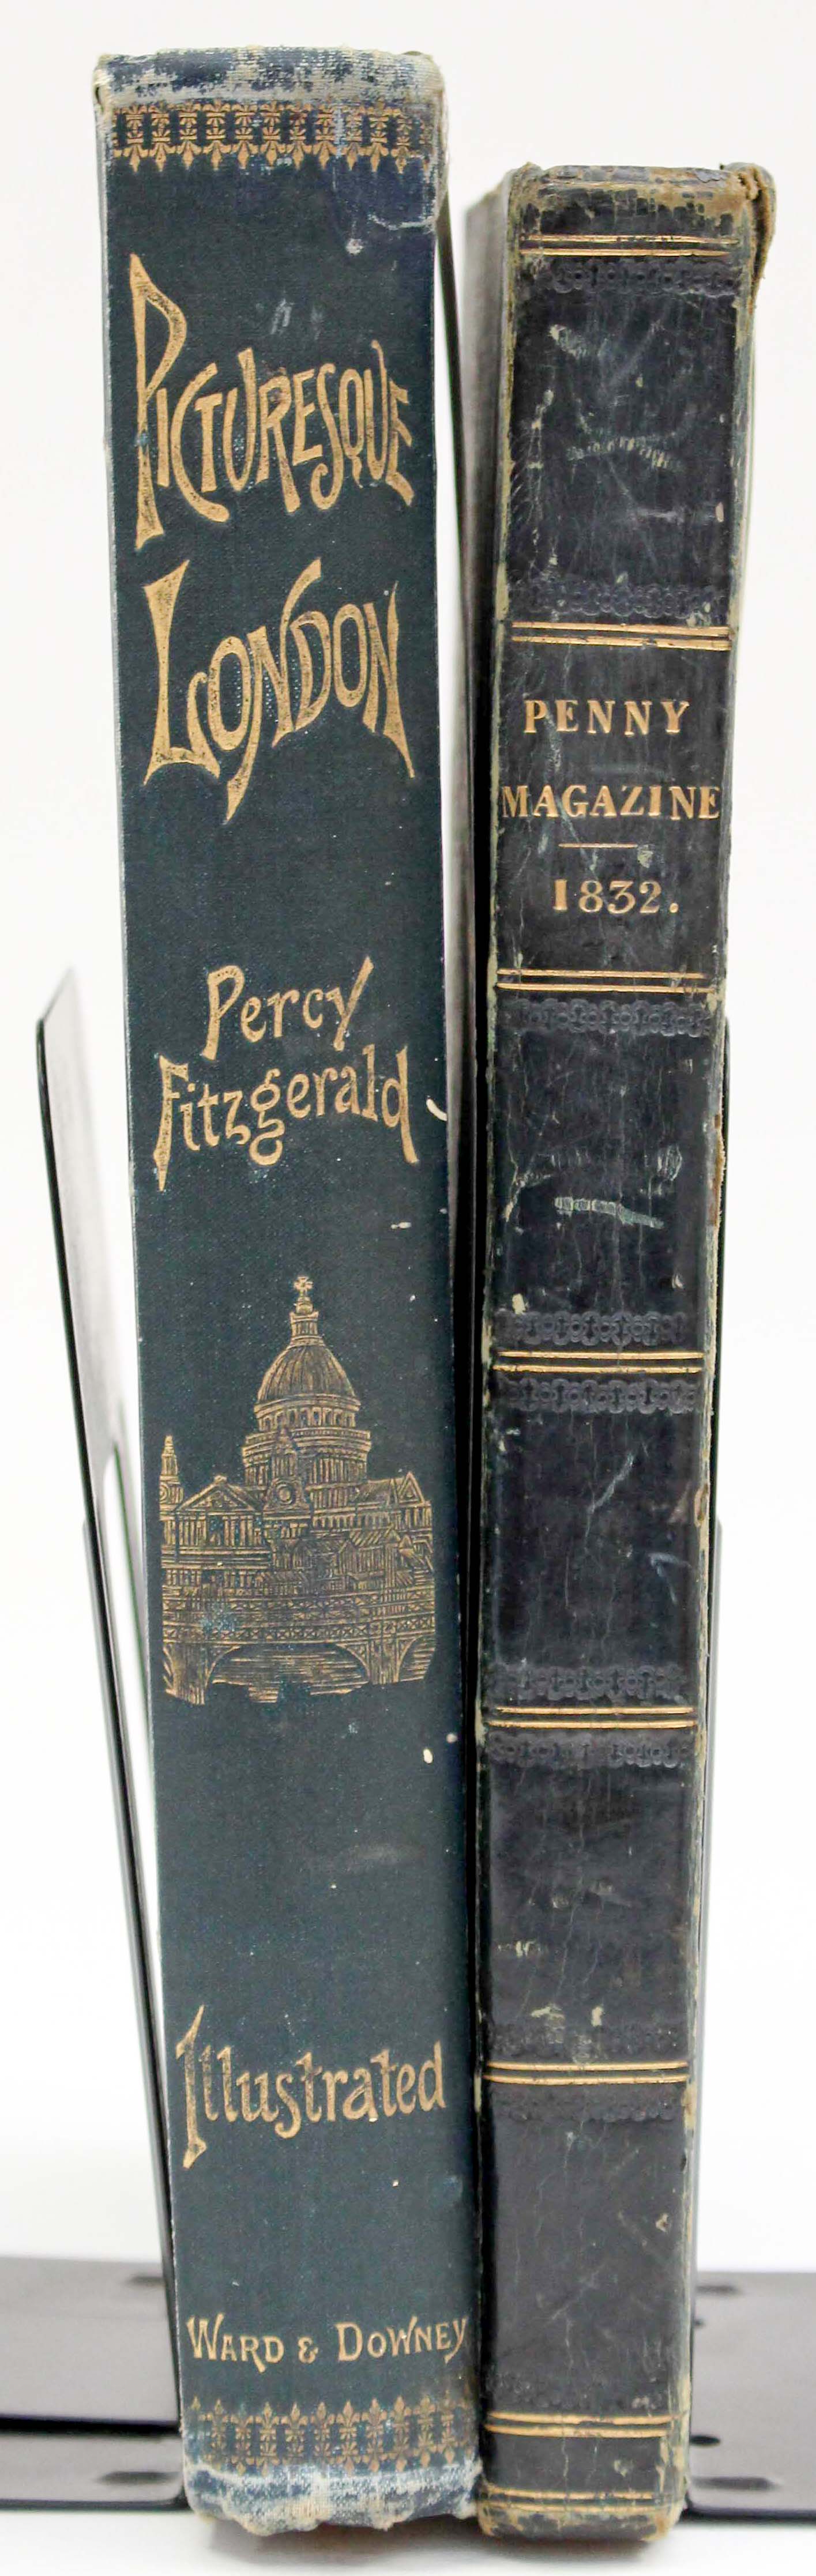 A Penny magazine 1832 and Percy Fitzgerald - Picturesque London,